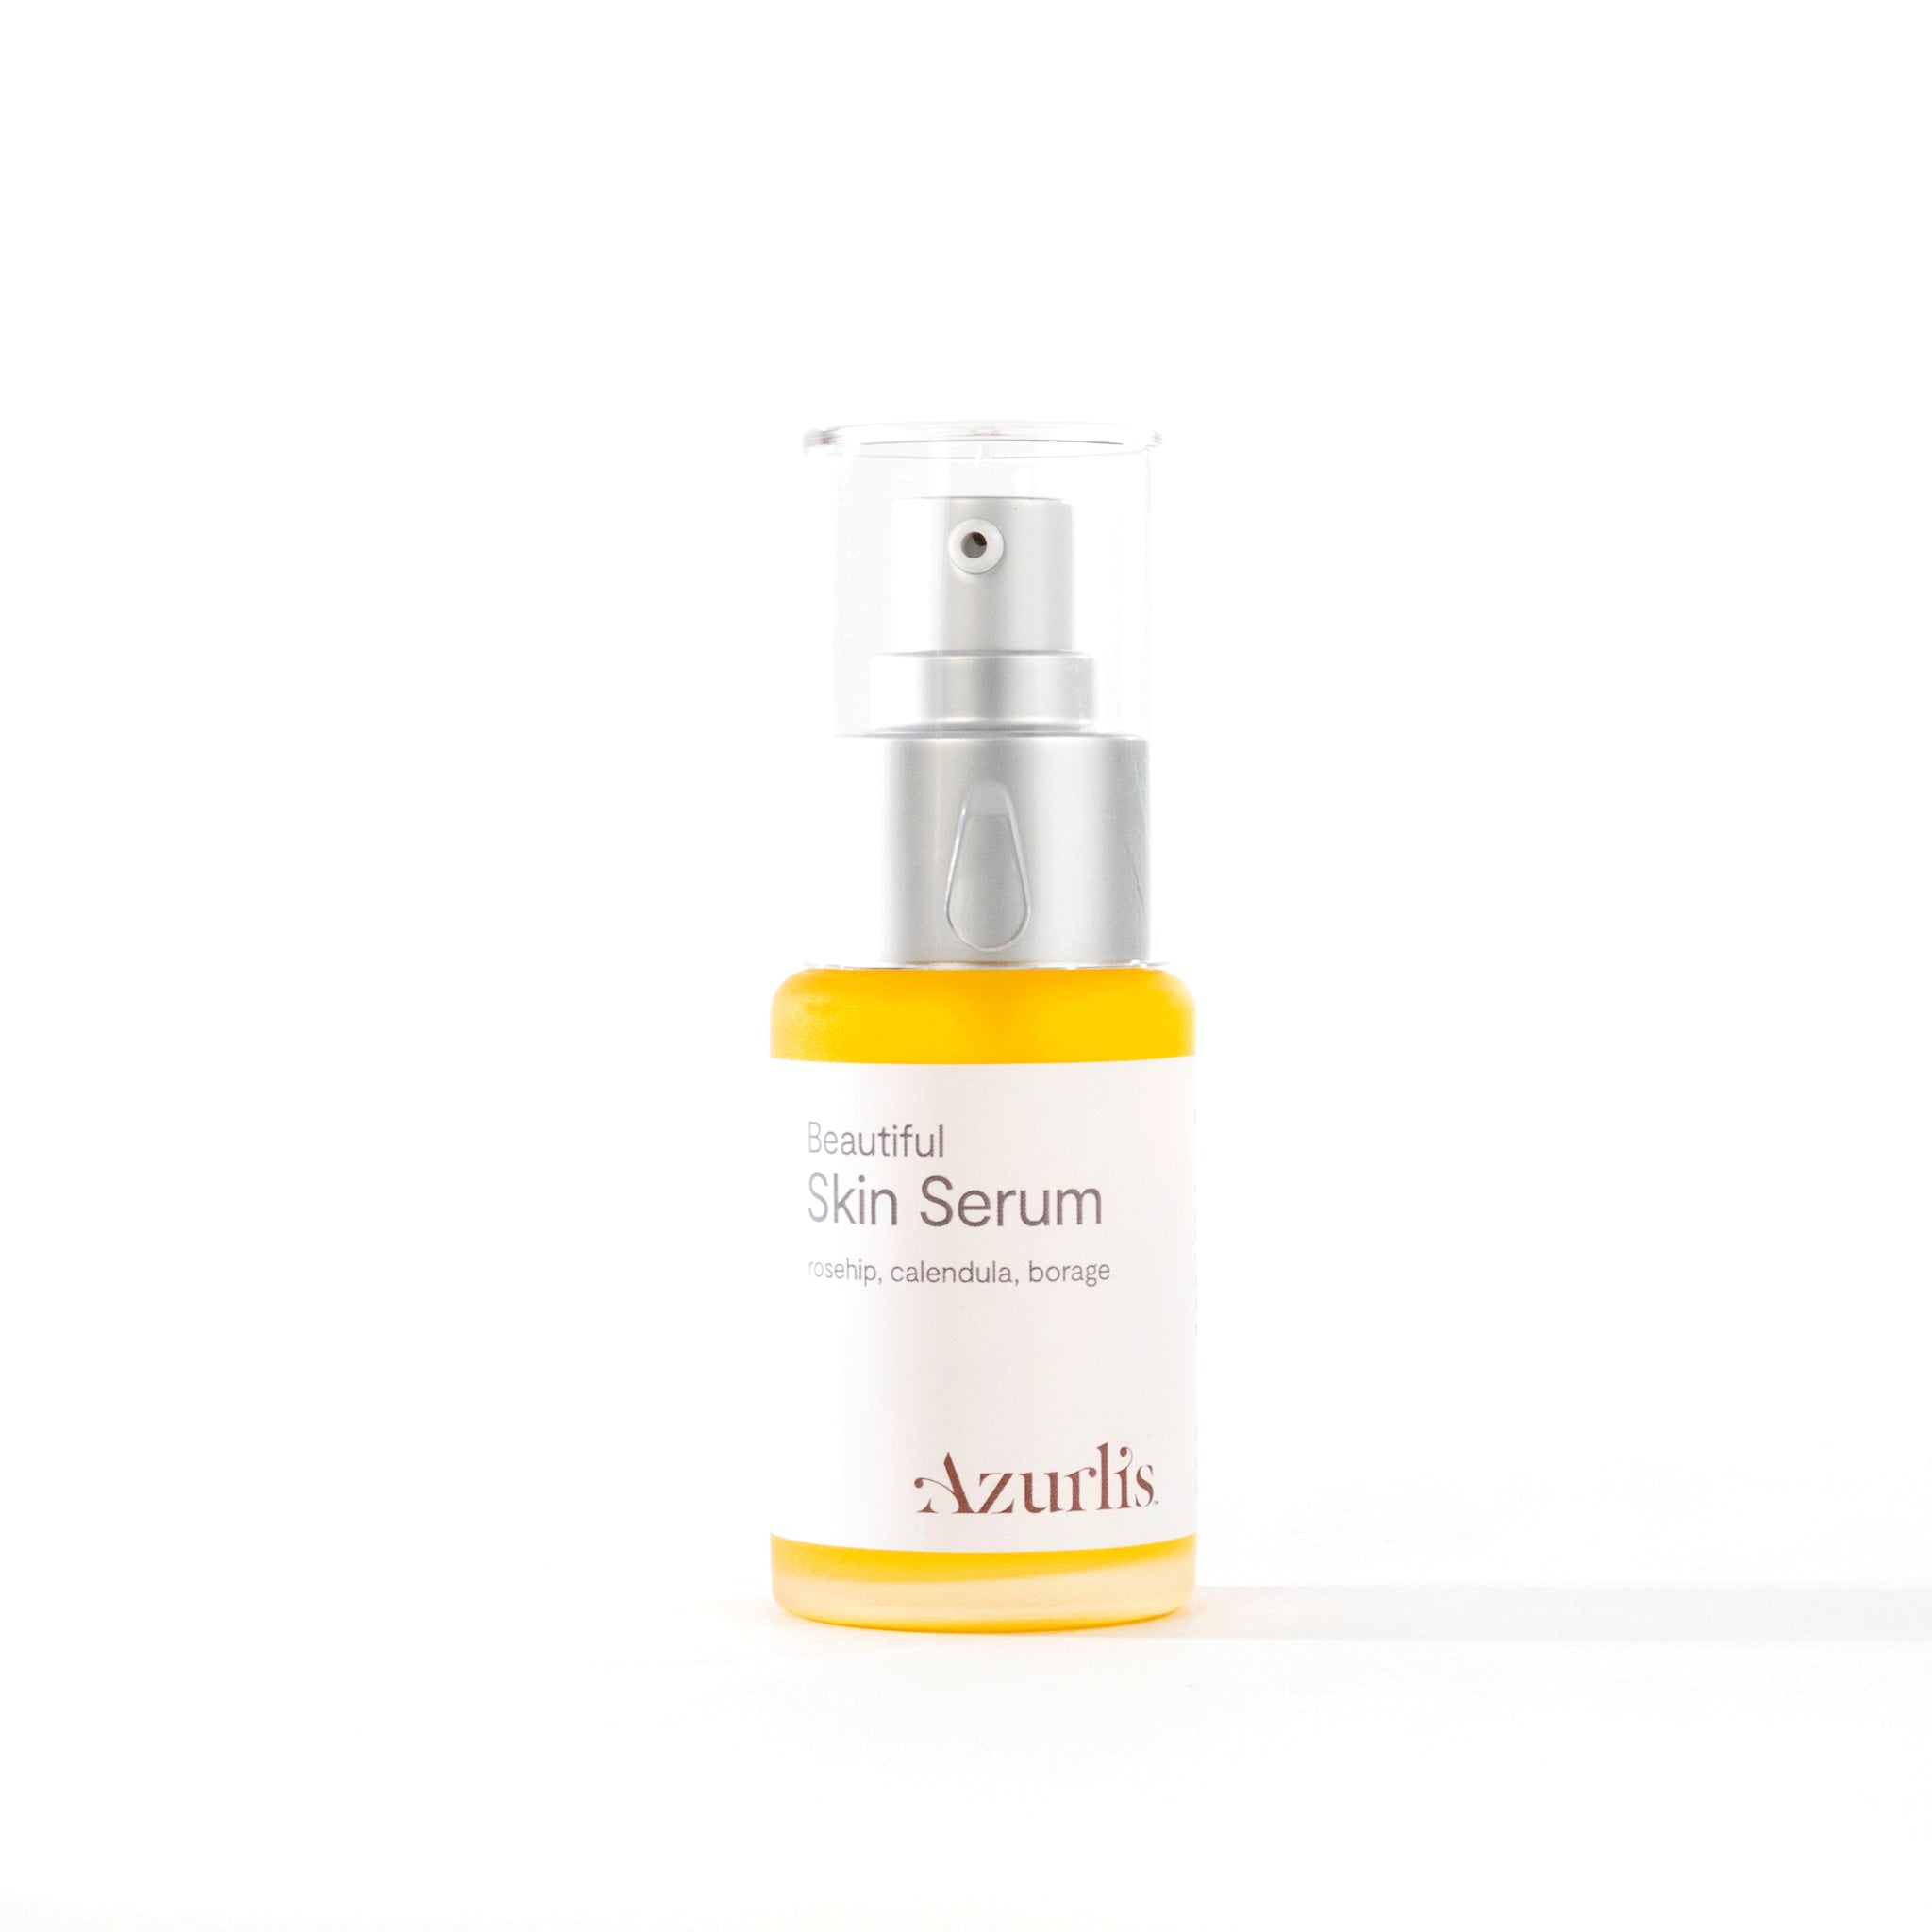 The Beautiful Skin Serum touches your skin with the gentleness of nature and the care of an angel.